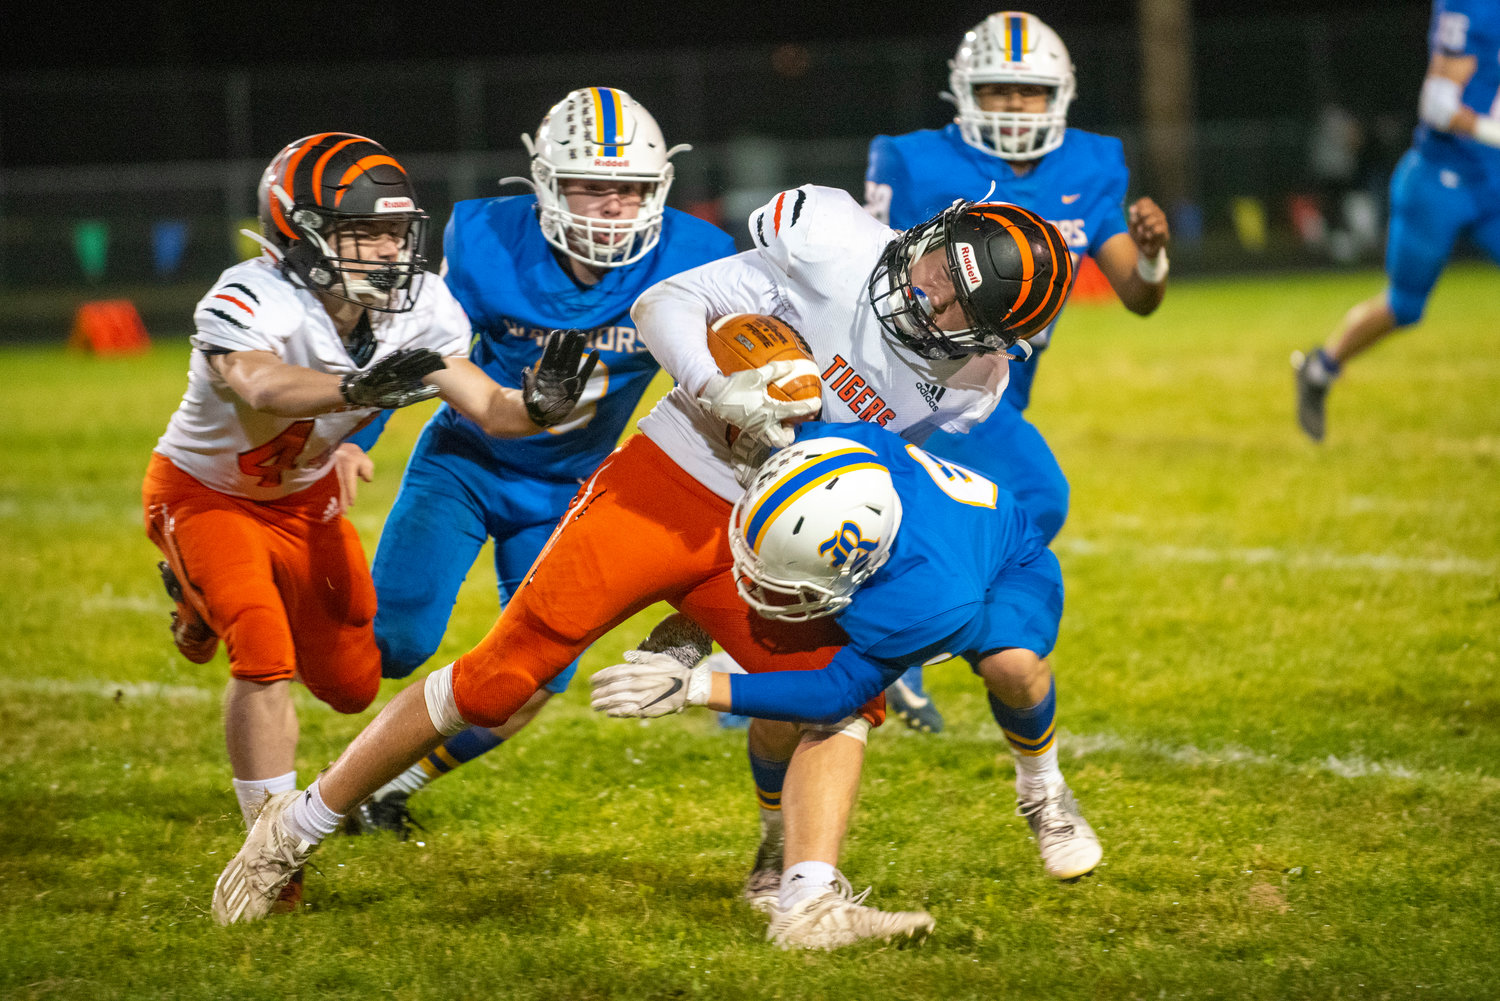 Rochester’s Carson Rotter (6) gets a big hit on Centralia’s Blake Seymour (33) on a kick return on Oct. 2, 2021.